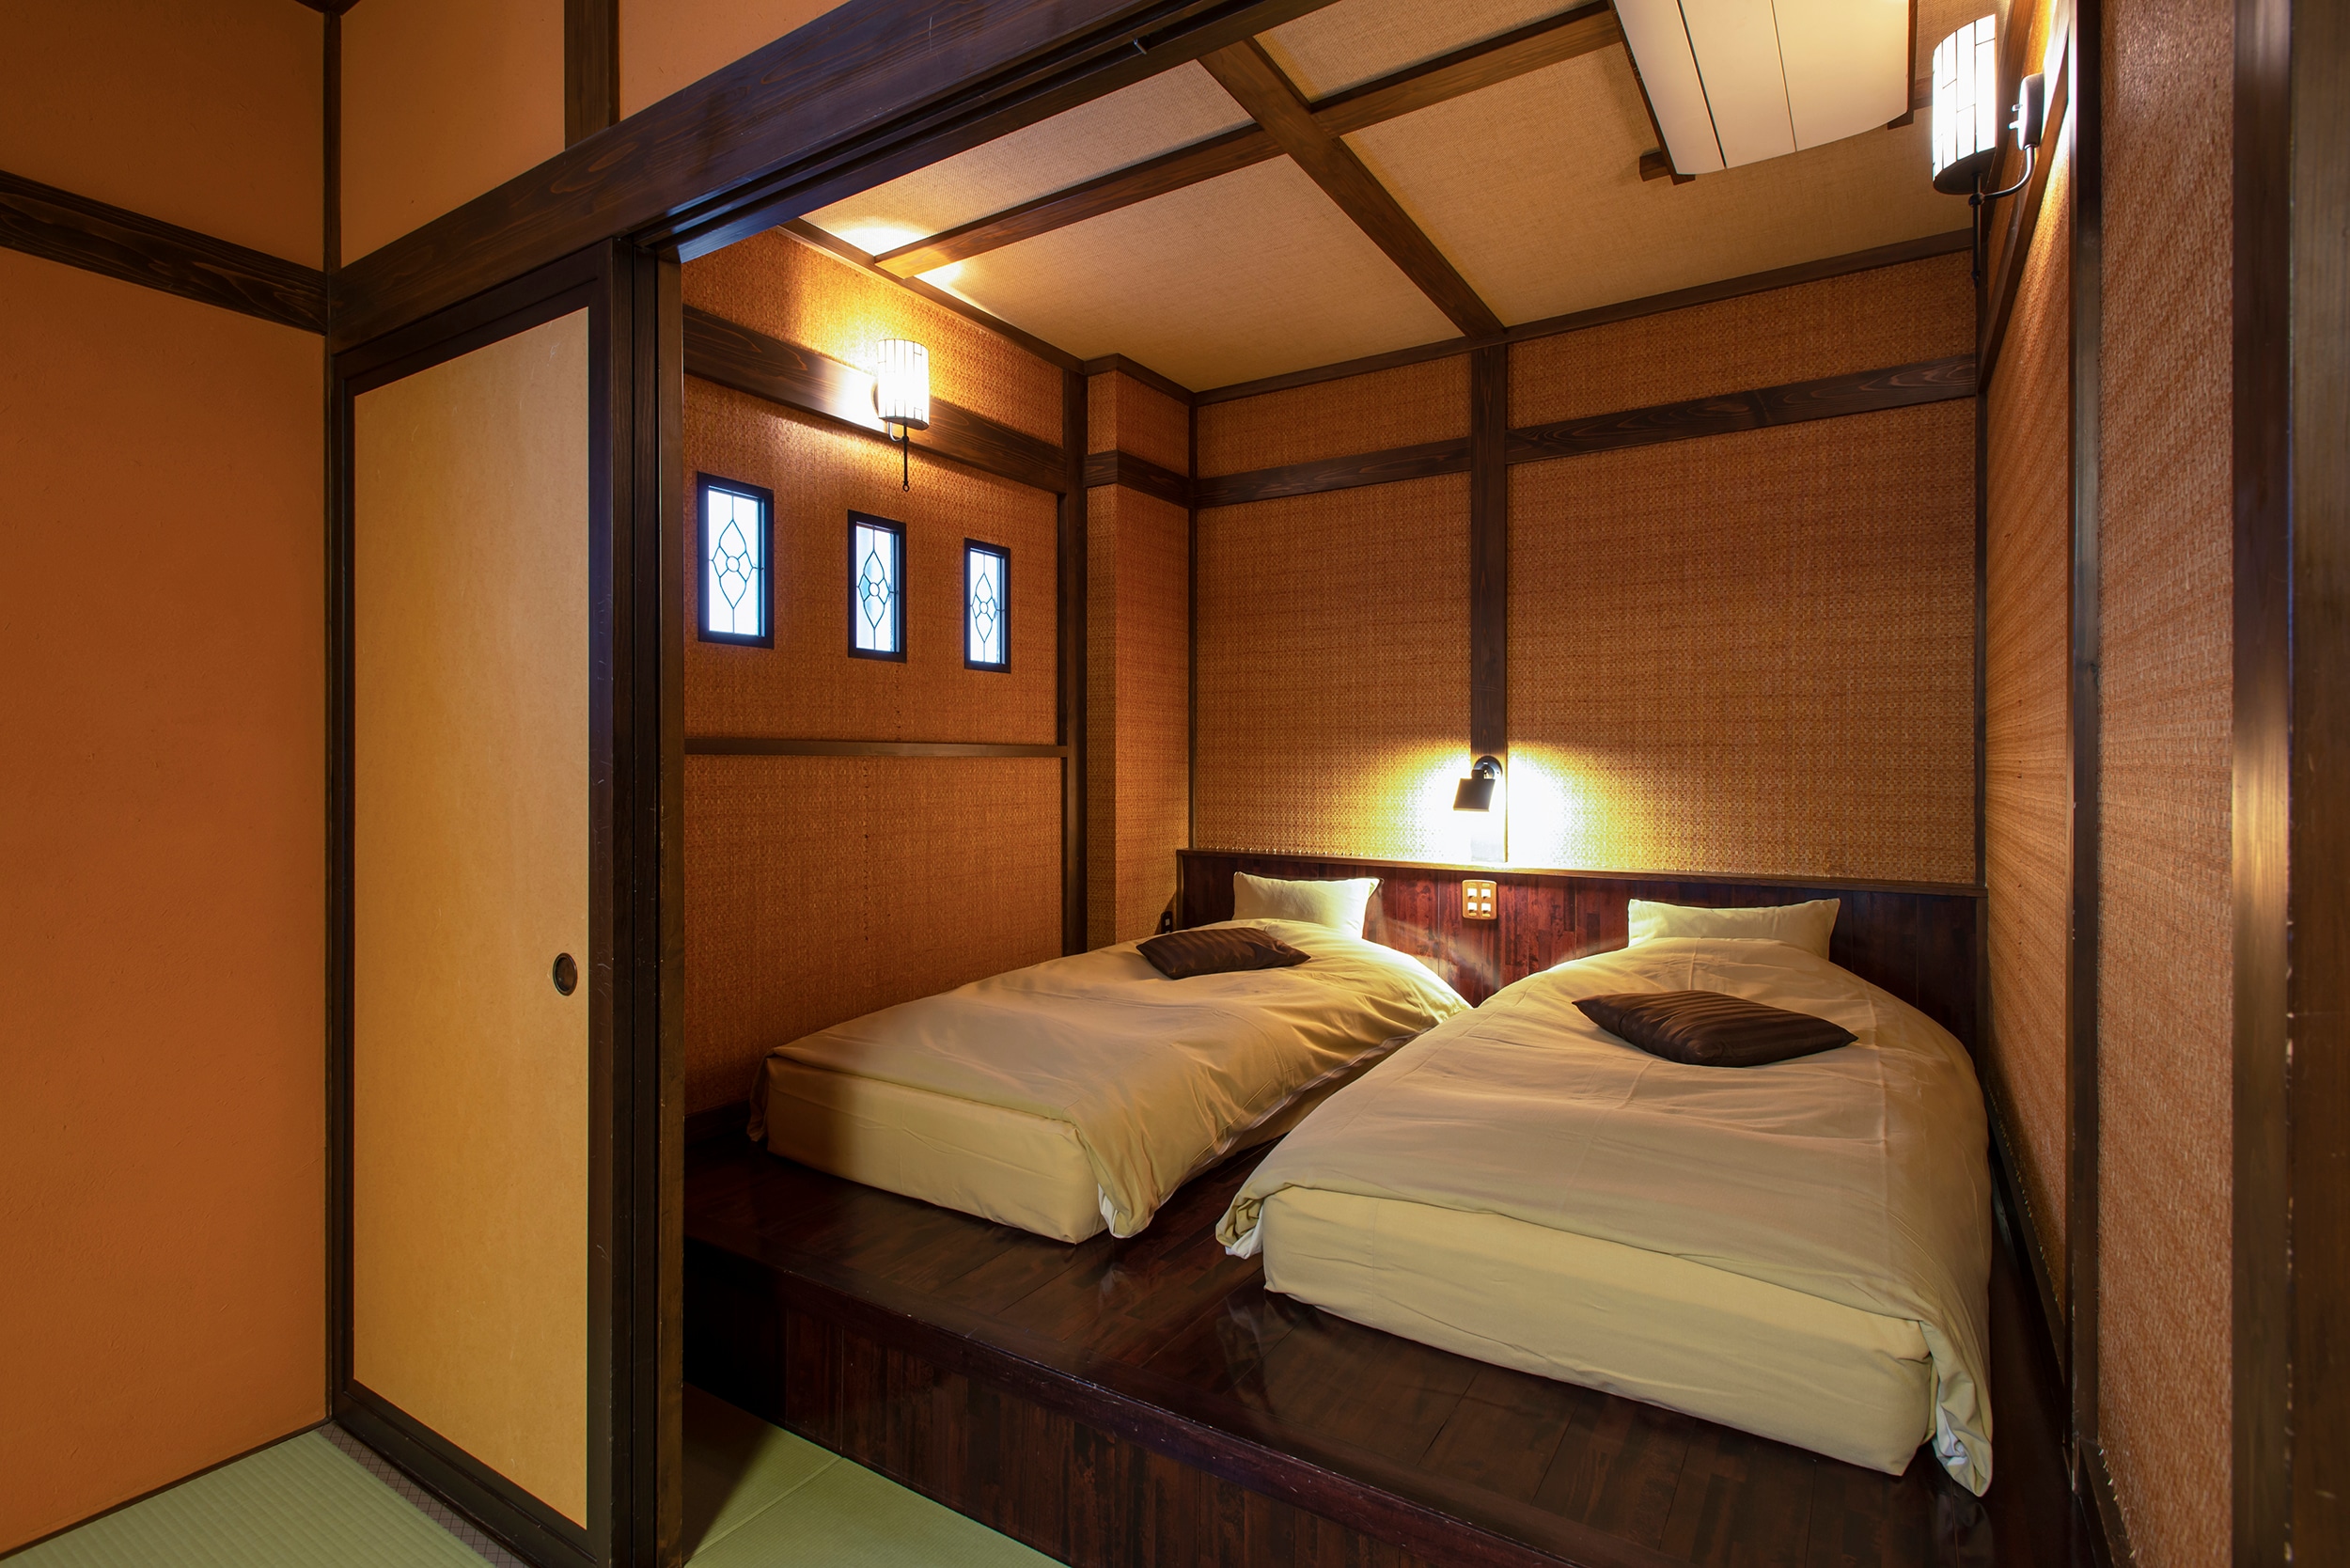 Special Japanese-Western style room